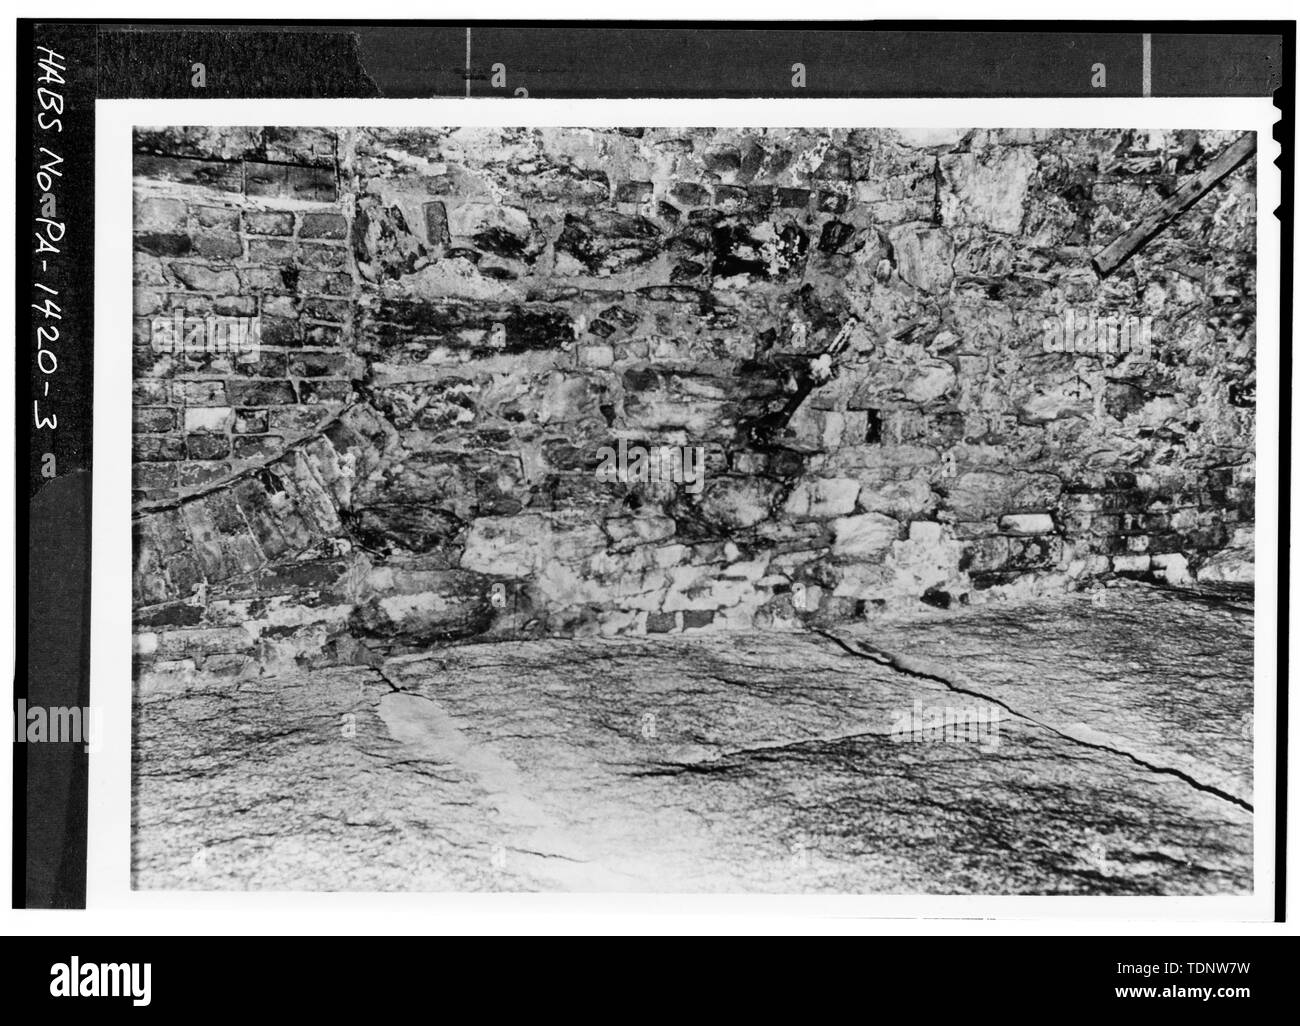 Photocopy Of July 13 1959 Photograph Courtesy Of Committee Of Public Property Philadelphia Pennsylvania View Of Underground Vault With Granite Ceiling And Rubble Wall Note Arch At Right Side Of Photo